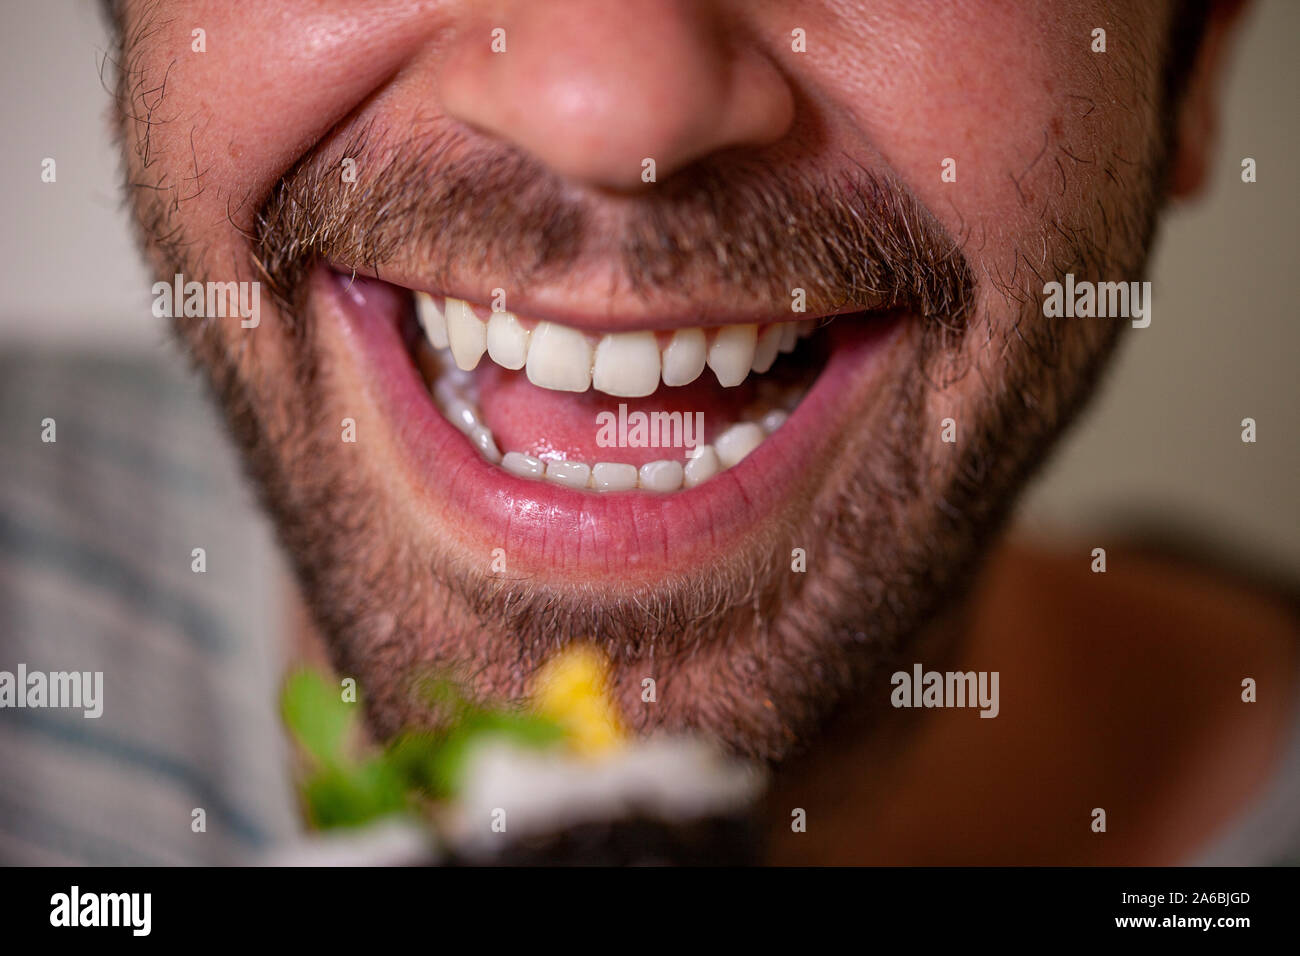 Close up of a smiling mouth of a bearded caucasian man about to eat a homemade sashimi sushi roll with chopsticks which is out of focus in the front Stock Photo